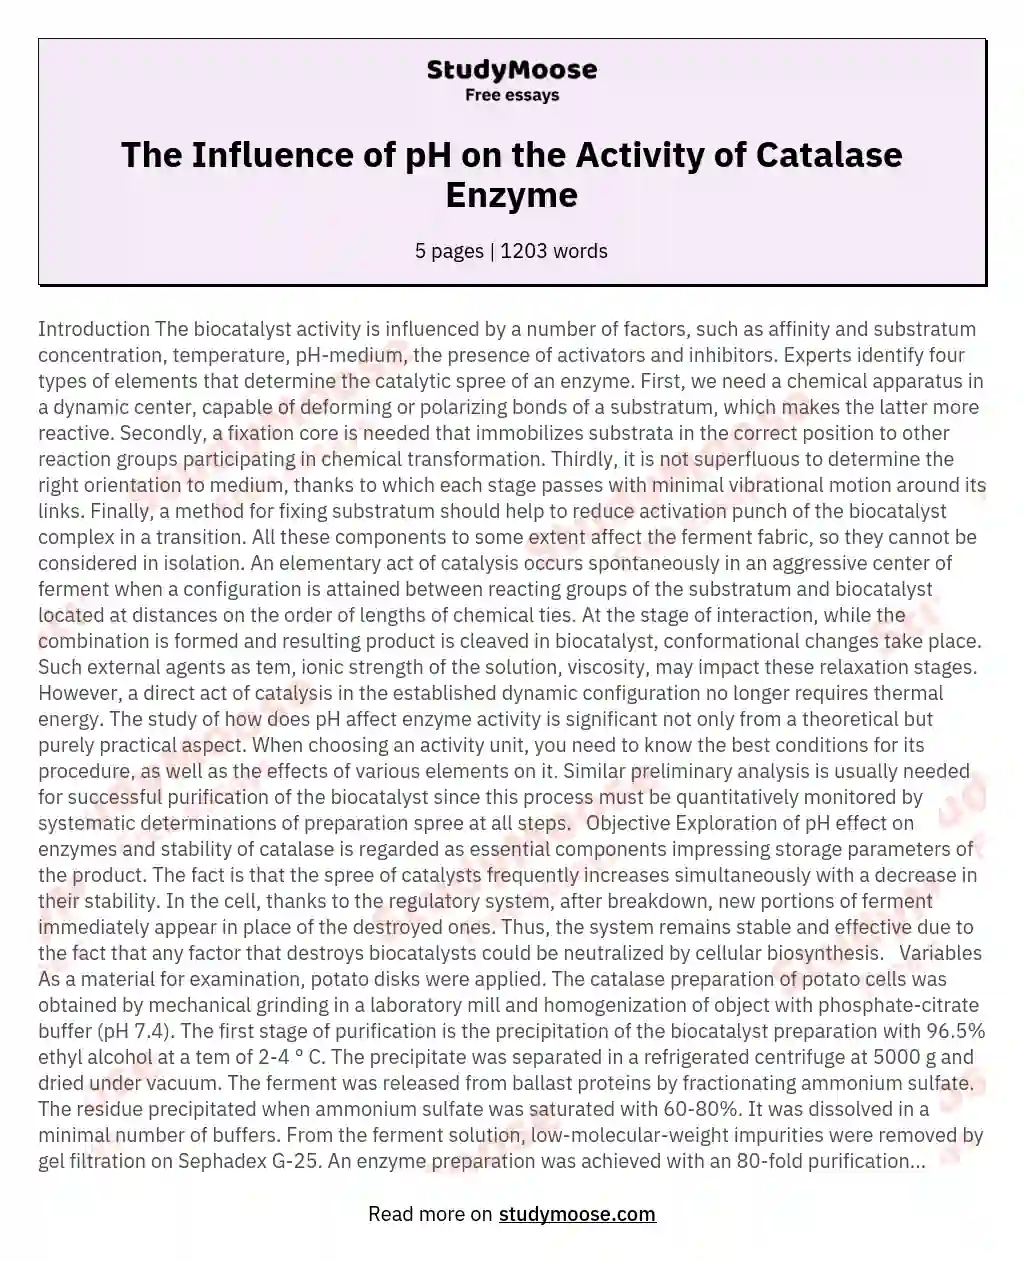 The Influence of pH on the Activity of Catalase Enzyme essay